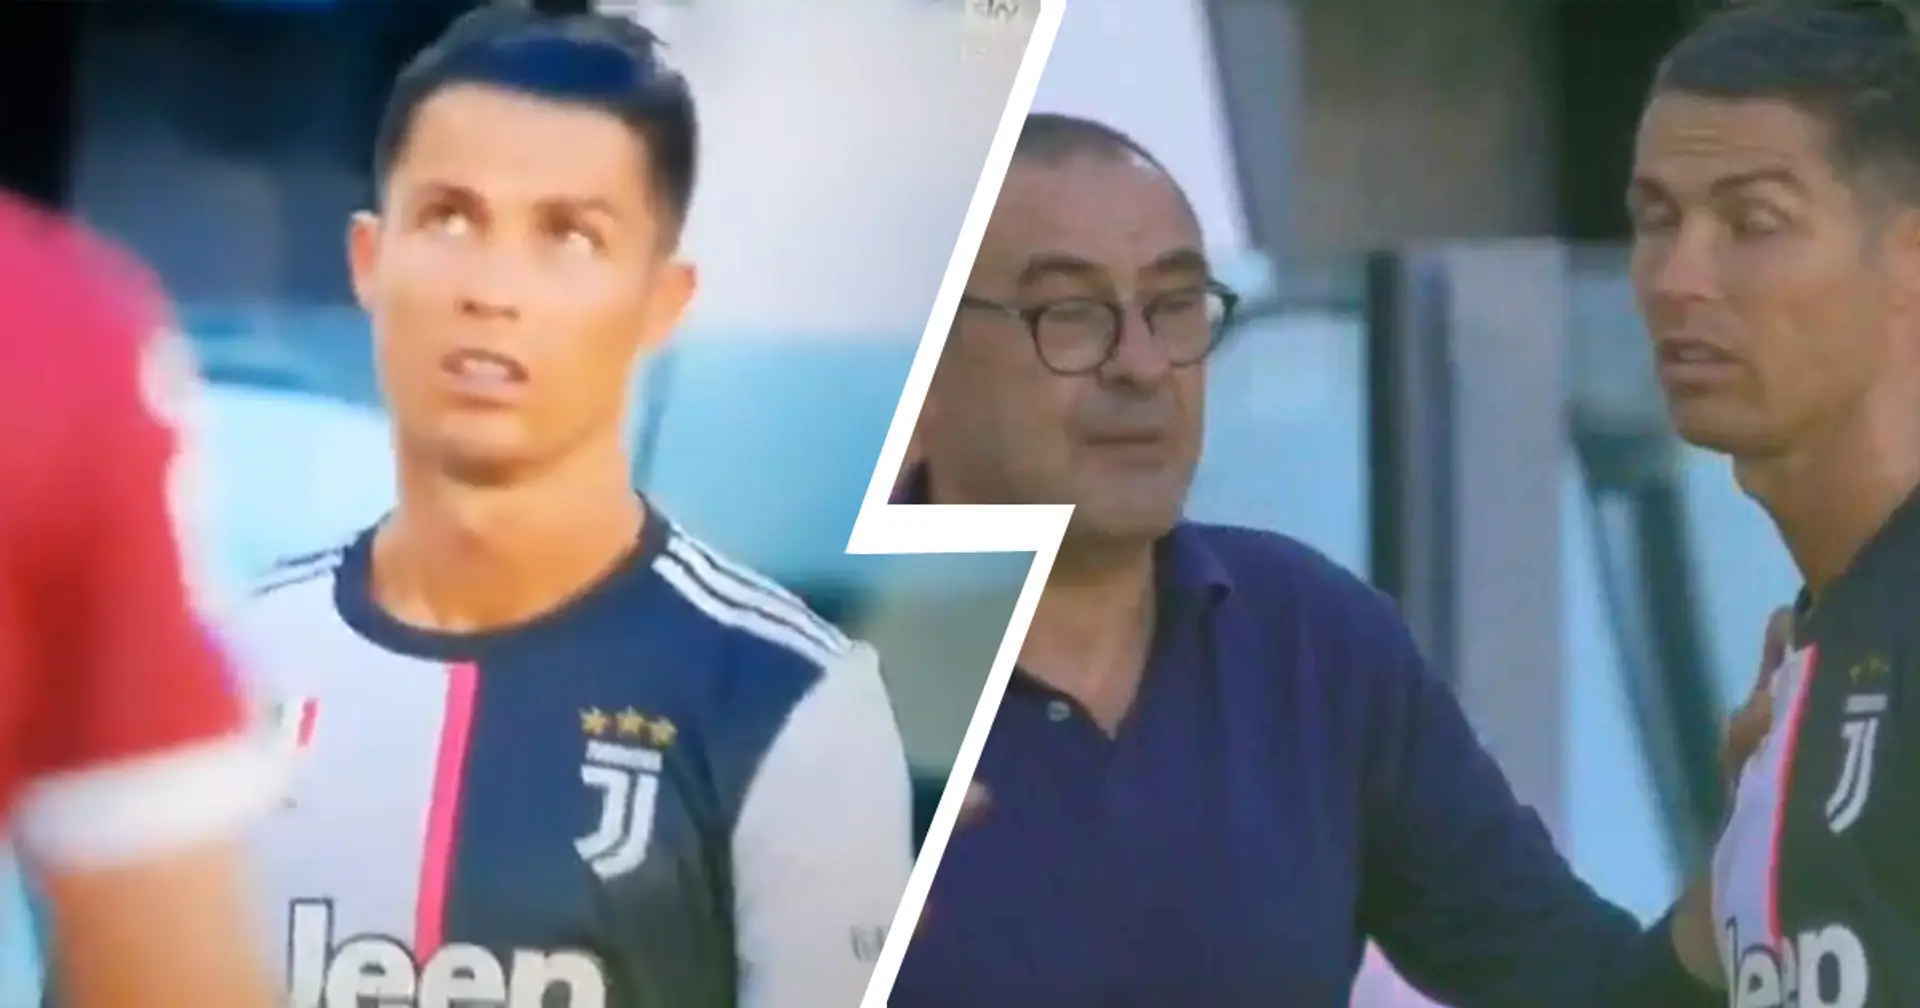 Trouble in paradise? Cristiano Ronaldo rolls eyes at Maurizio Sarri's suggestions during Turin derby